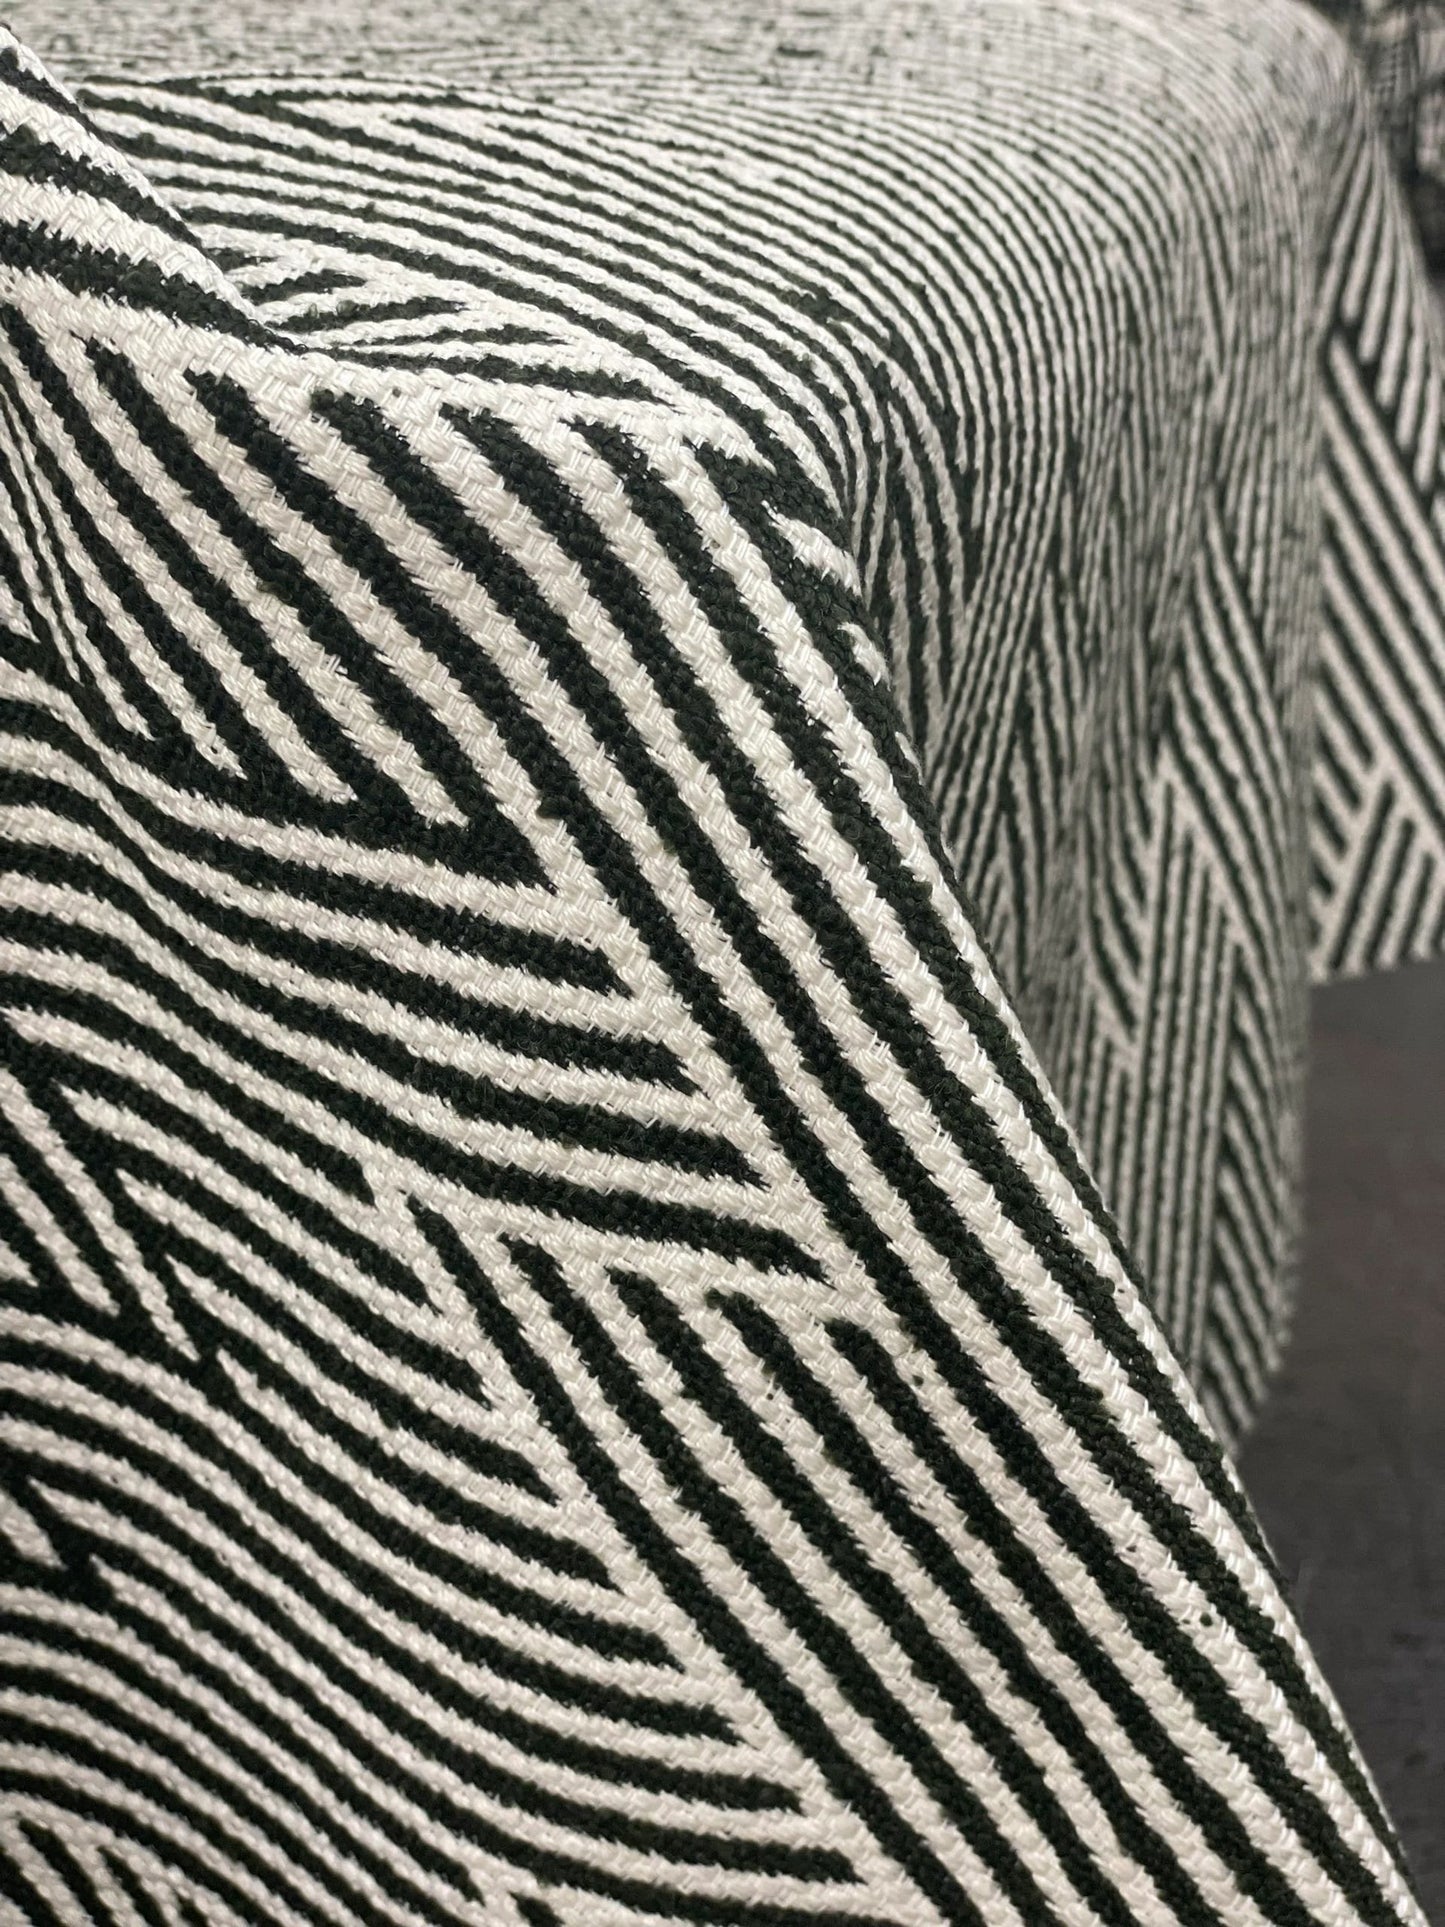 Geometric Striped Jacquard Boucle Upholstery Fabric|Bouble Fabric in Vintage Green and White|Upholstery Fabric By The Yard For Chair Couch